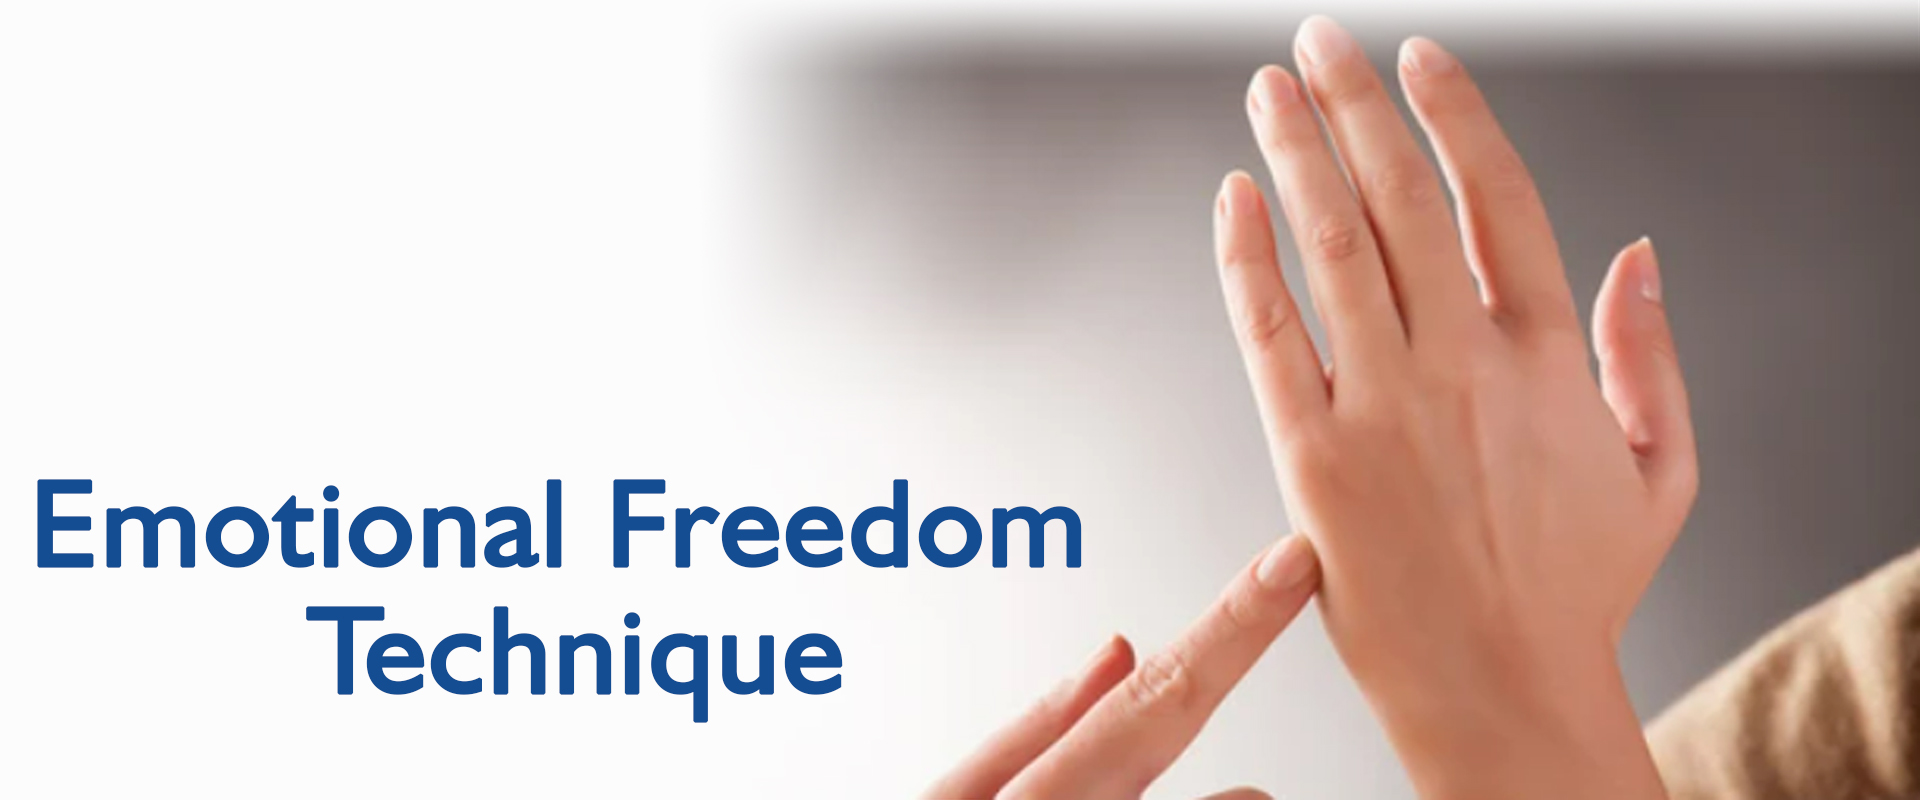 Emotional Freedom Technique BANNER